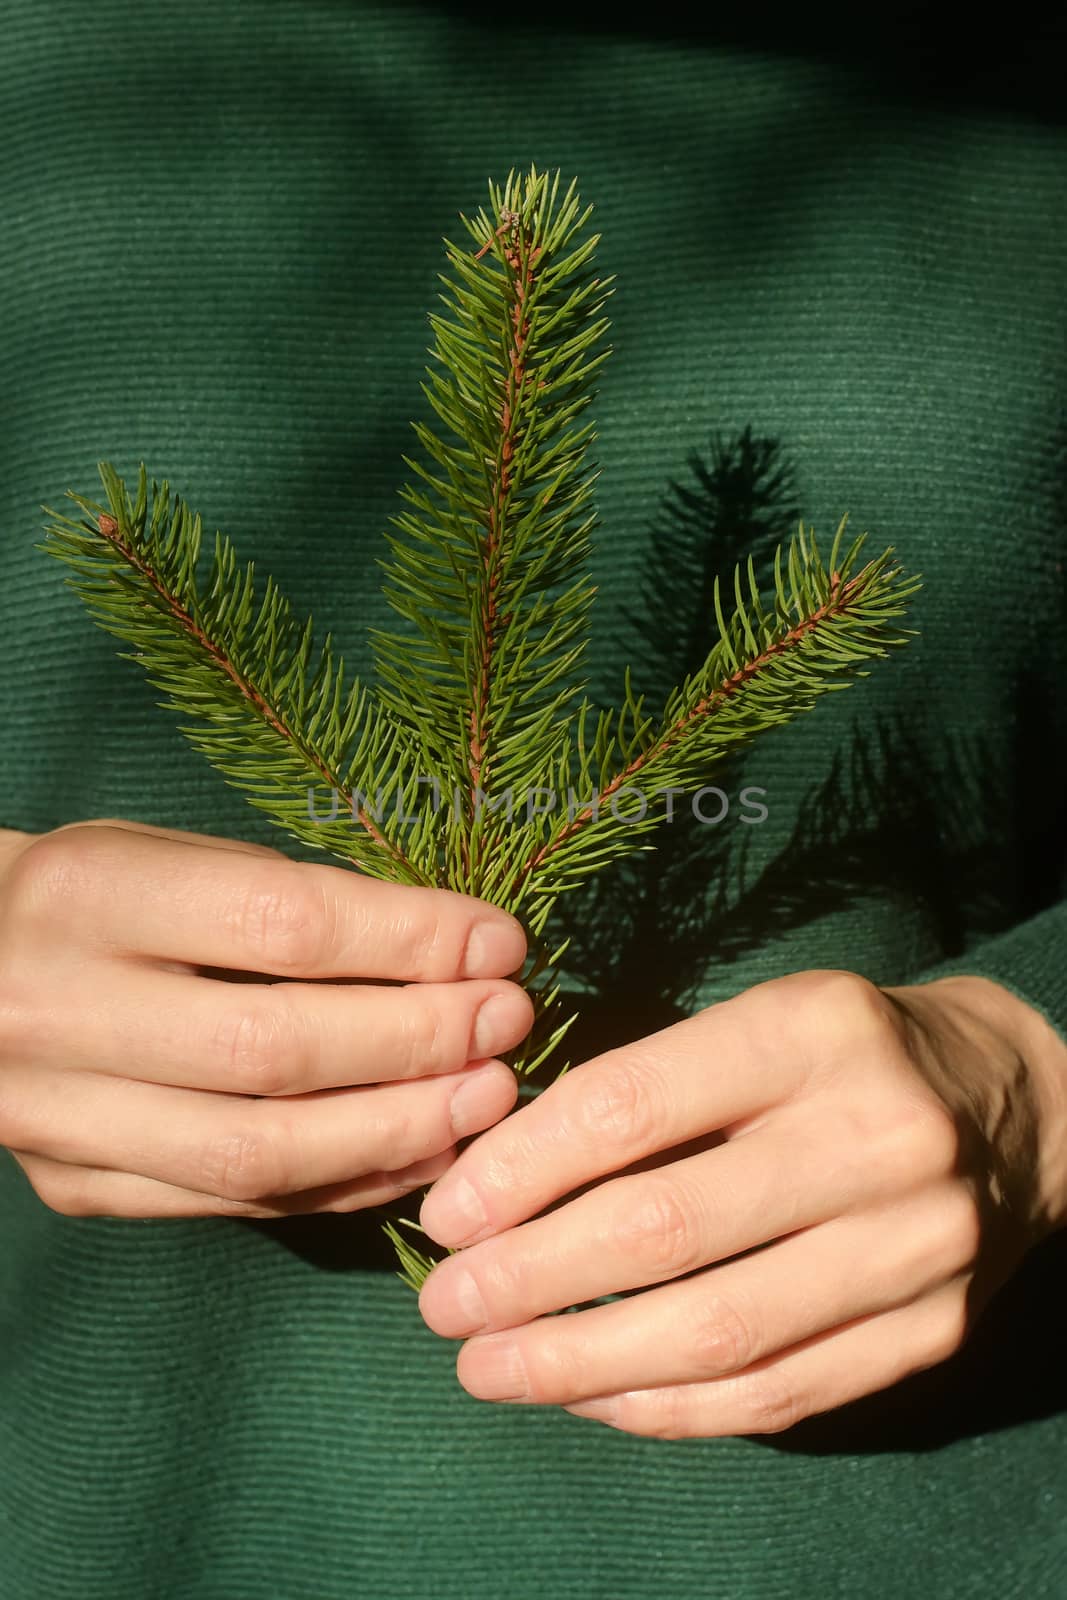 Woman is holding pine tree branch  by jordachelr